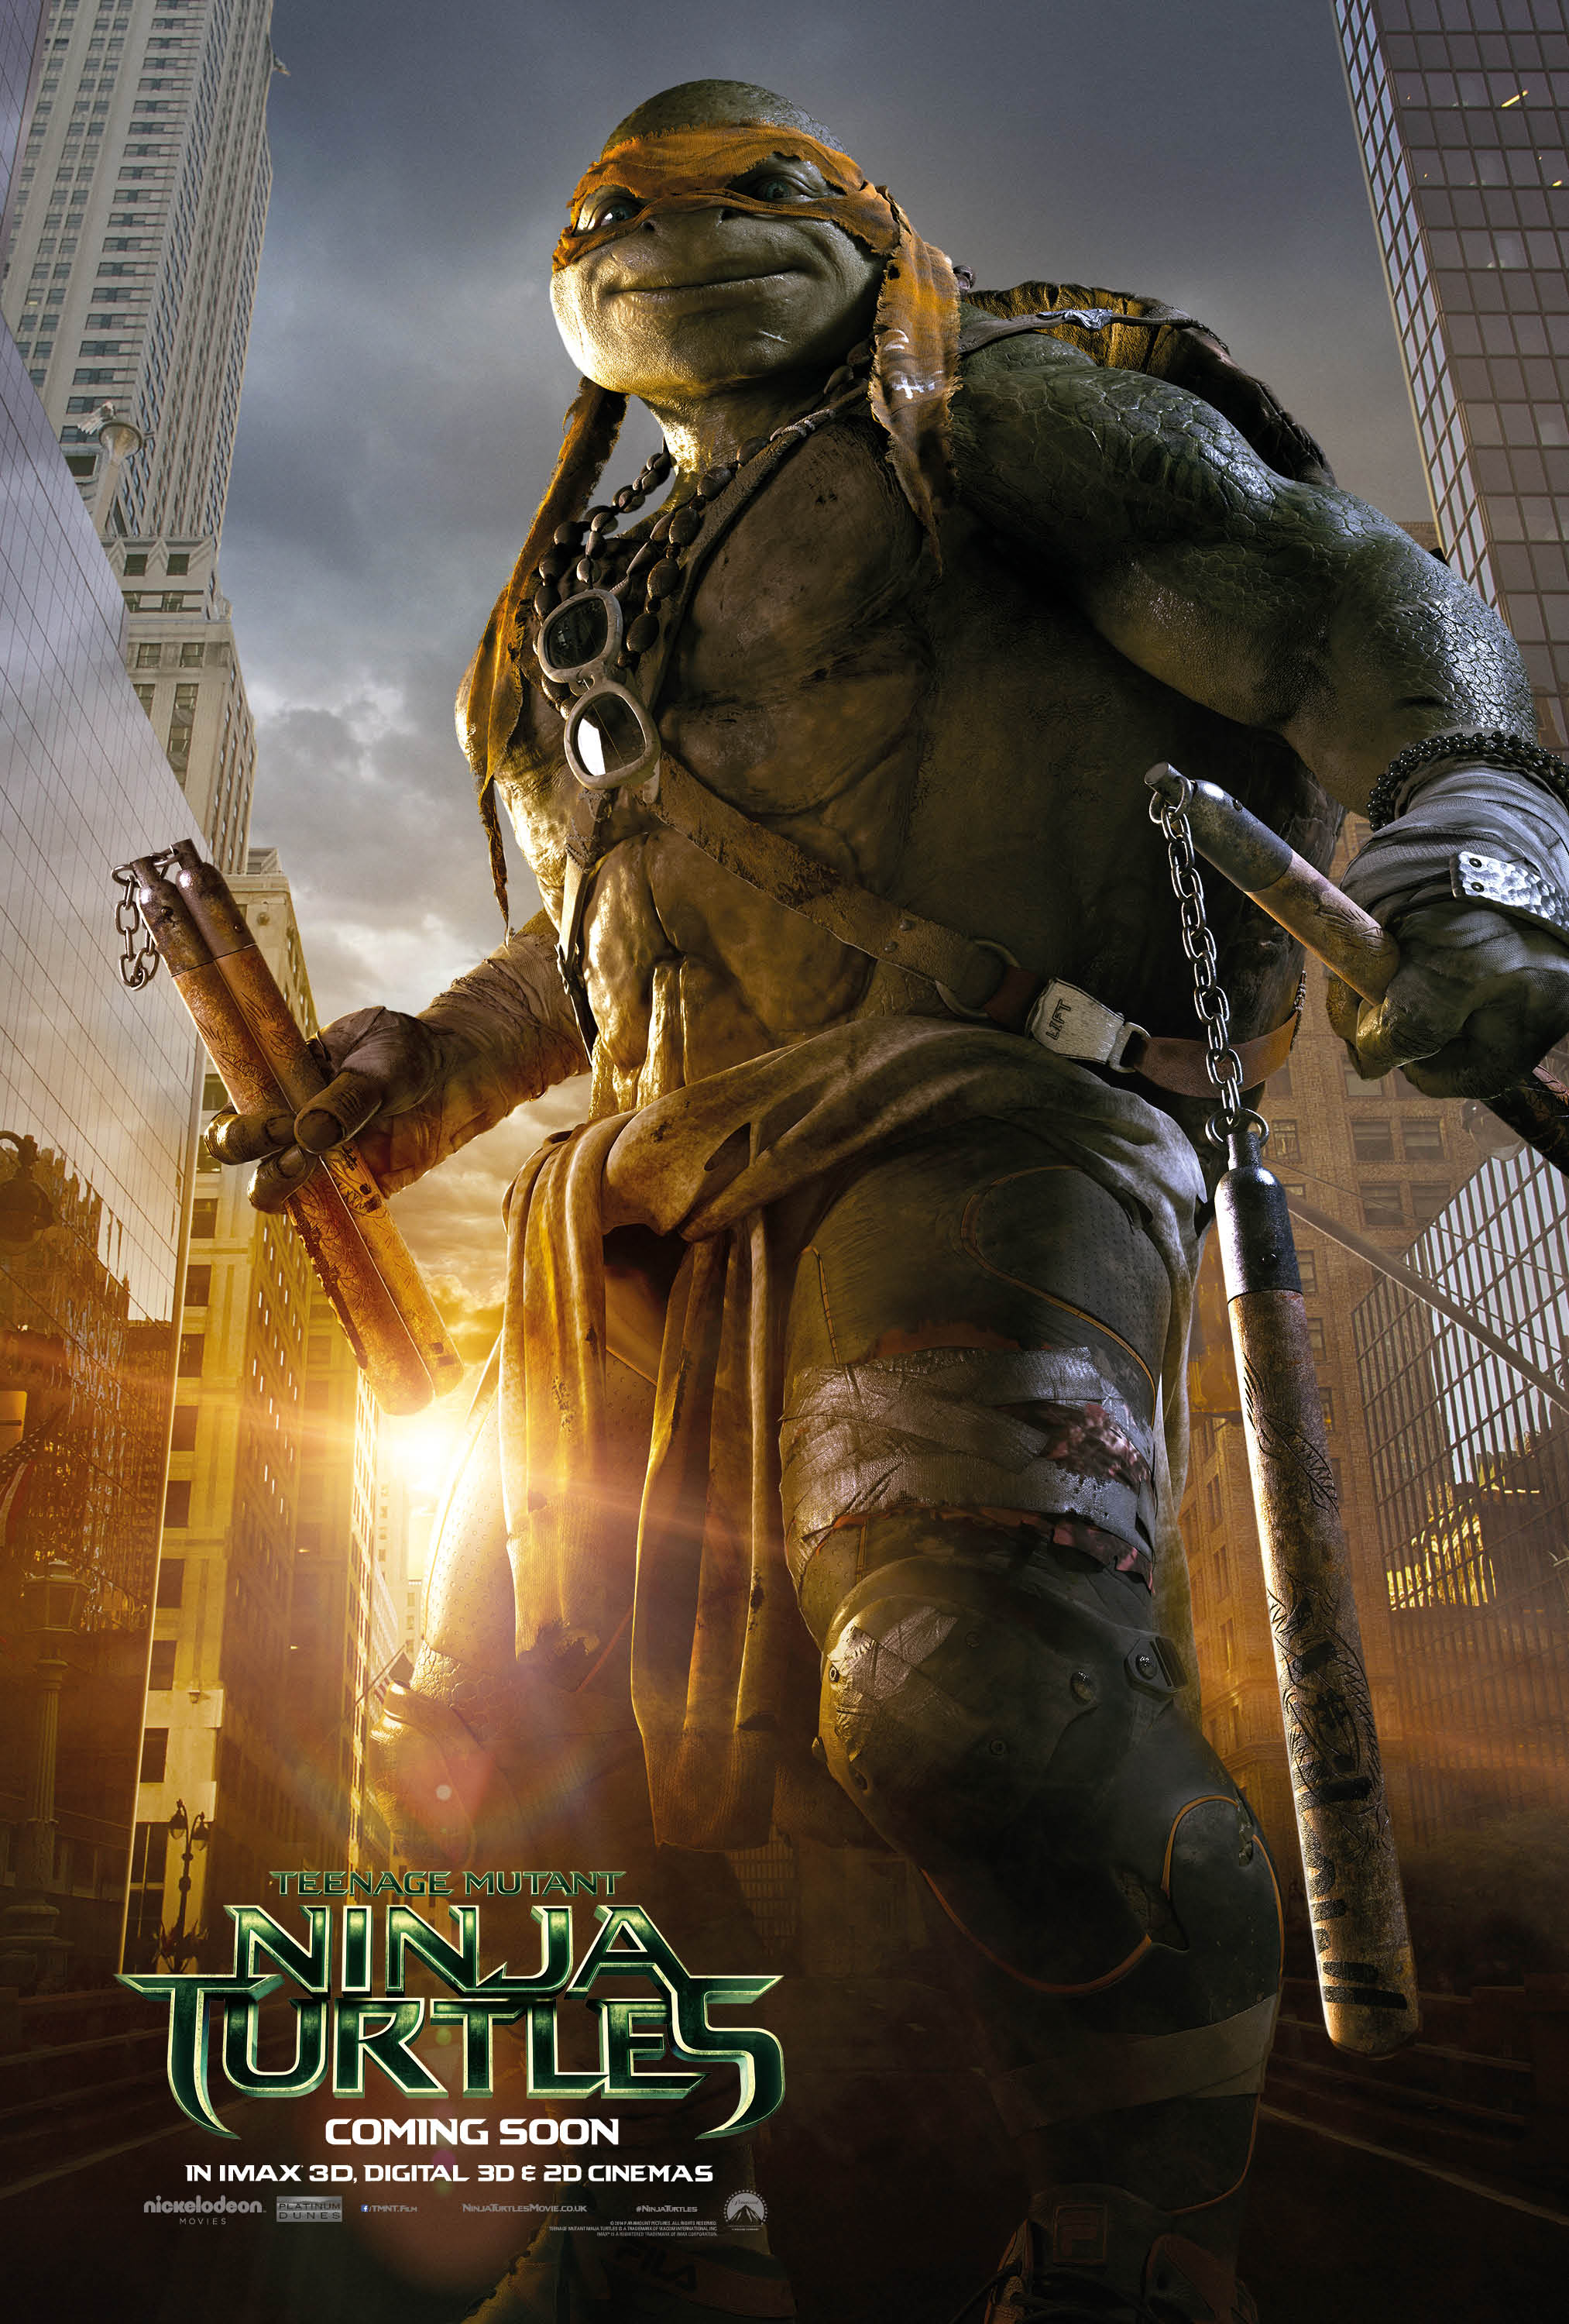 Four New Character Posters for Teenage Mutant Ninja Turtles